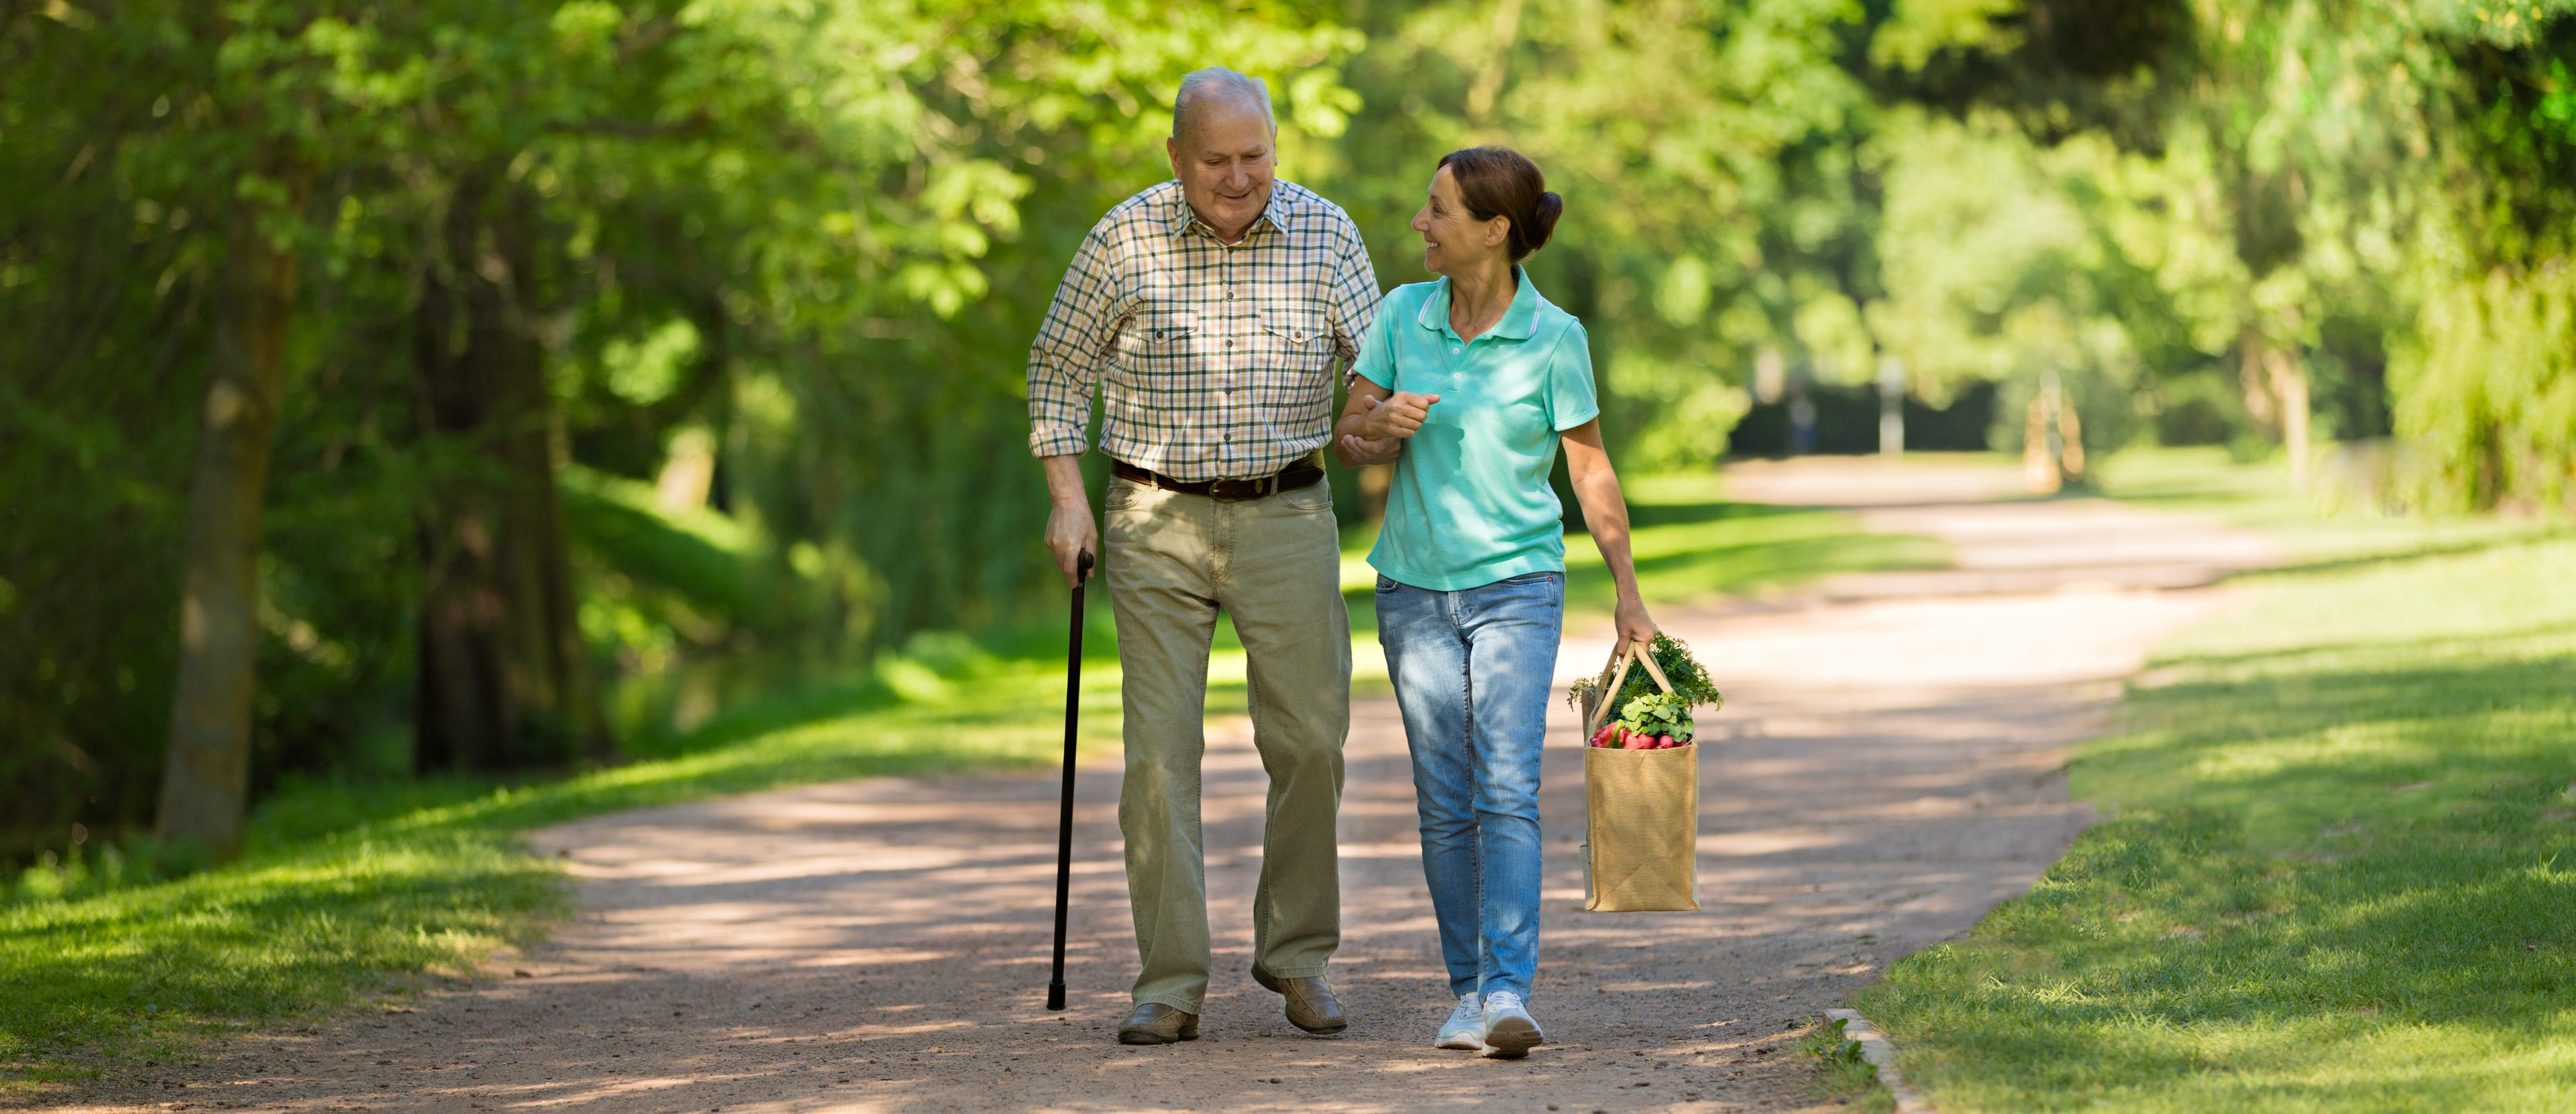 Caregiver – woman helping senior man outdoors in the park